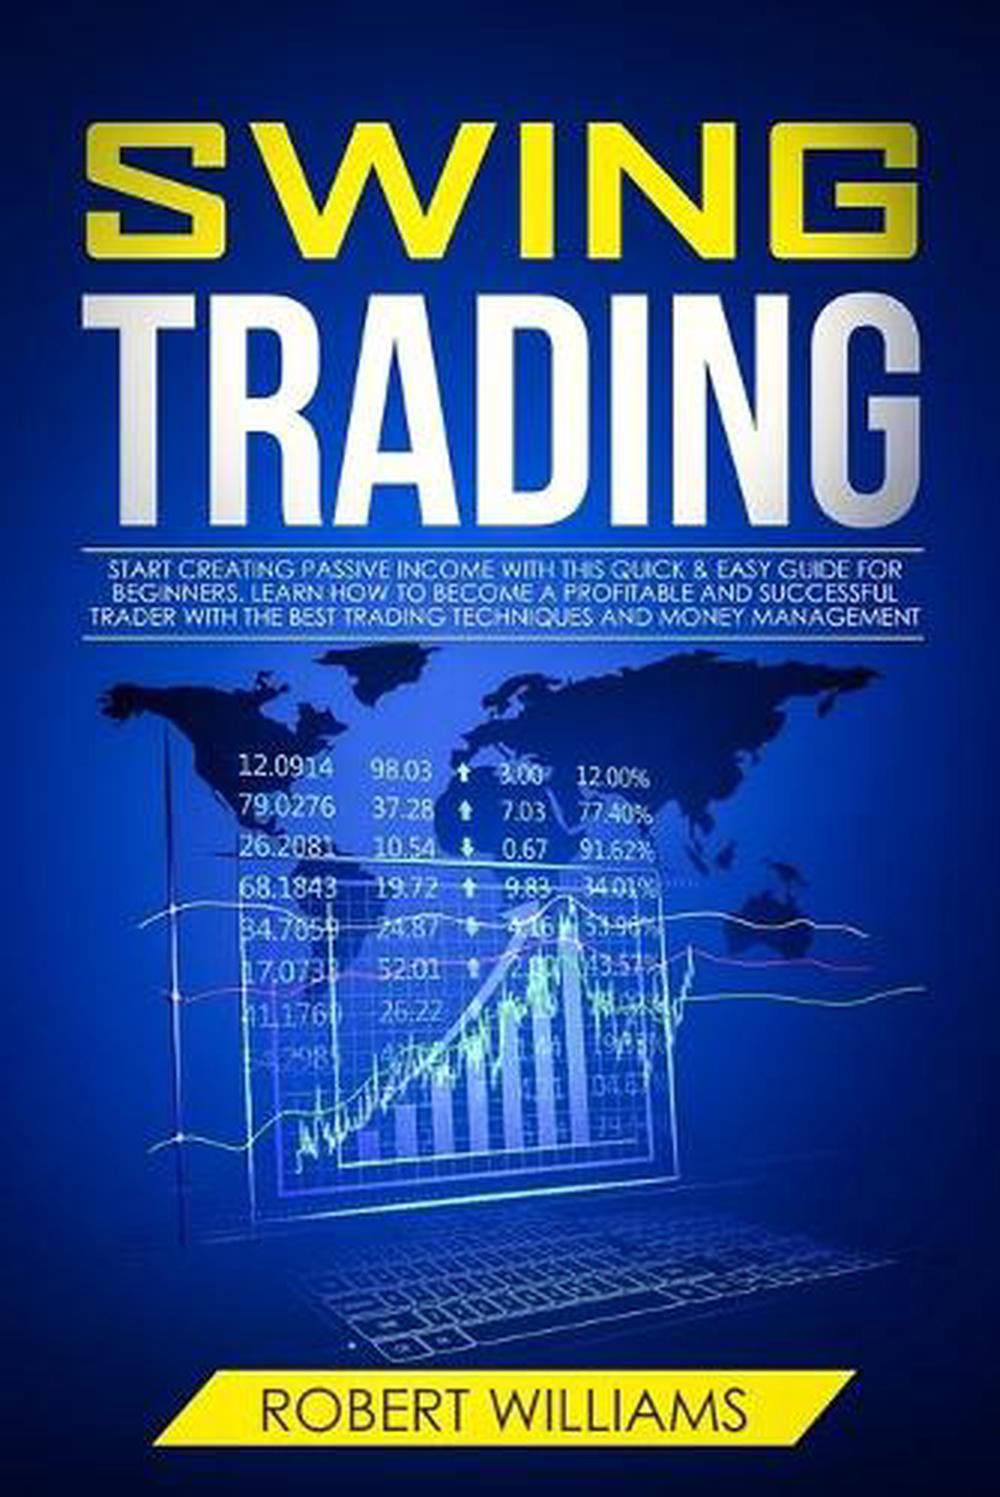 Swing Trading by Robert Williams (English) Paperback Book Free Shipping